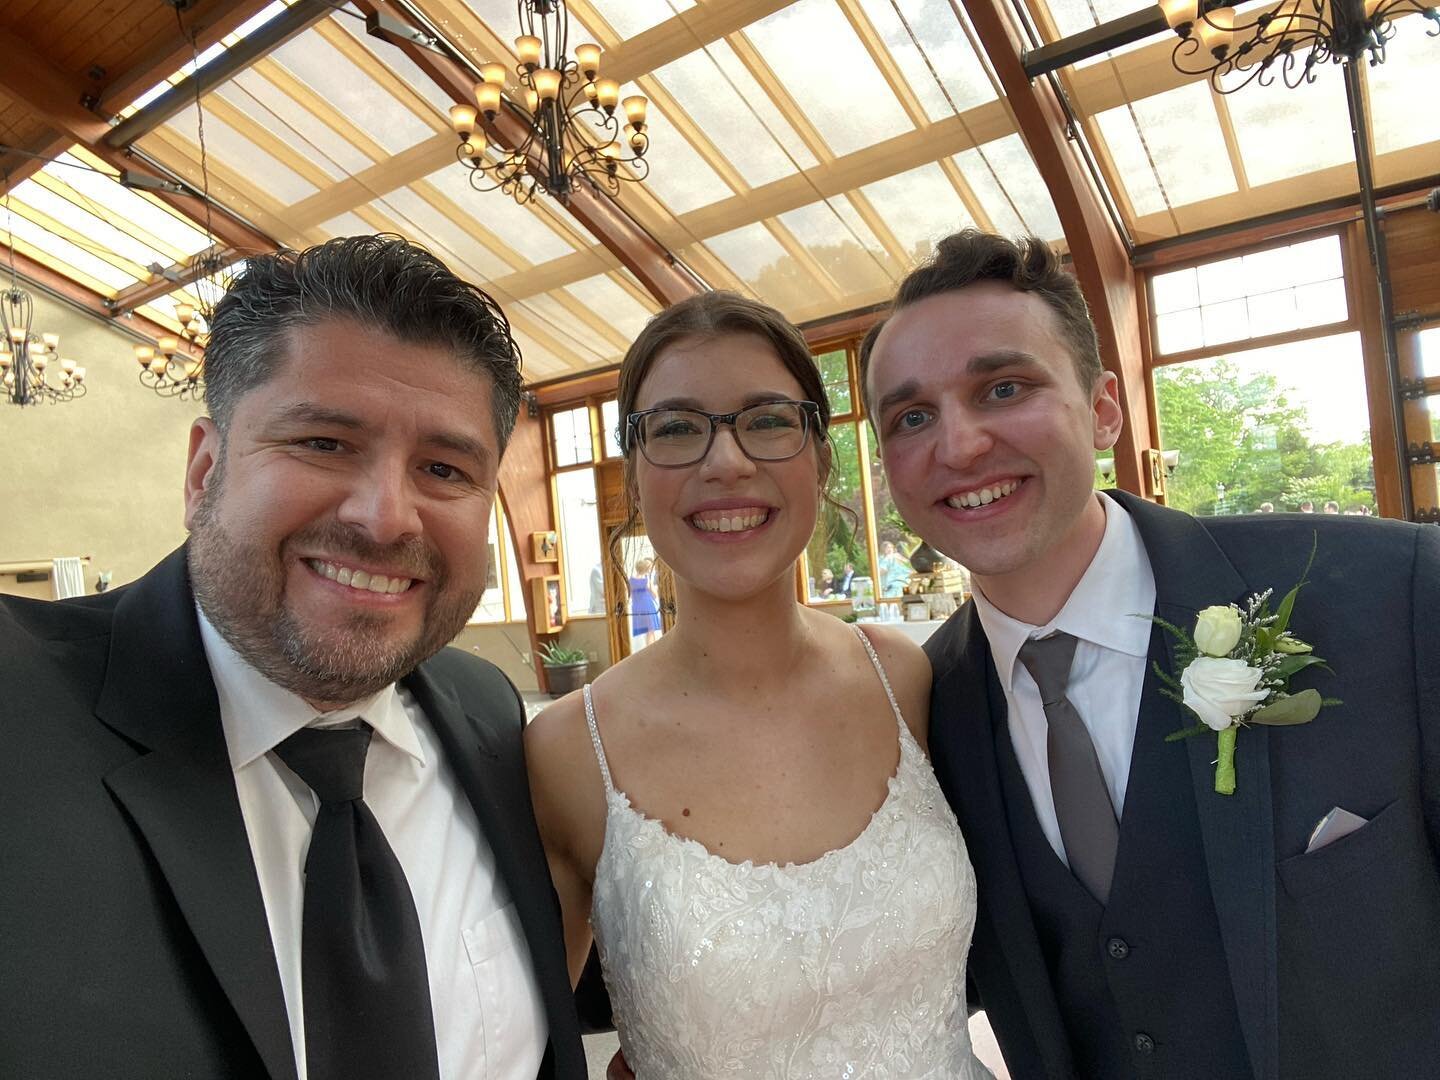 Congratulations Bonnie and Tom!  Much love, laughter and happiness to you.  #happywedding #newlyweds💍 #weddingvibes @theconservatorysussexnj #rusticelegance #elegancetraditionfun @steveguillenproductions